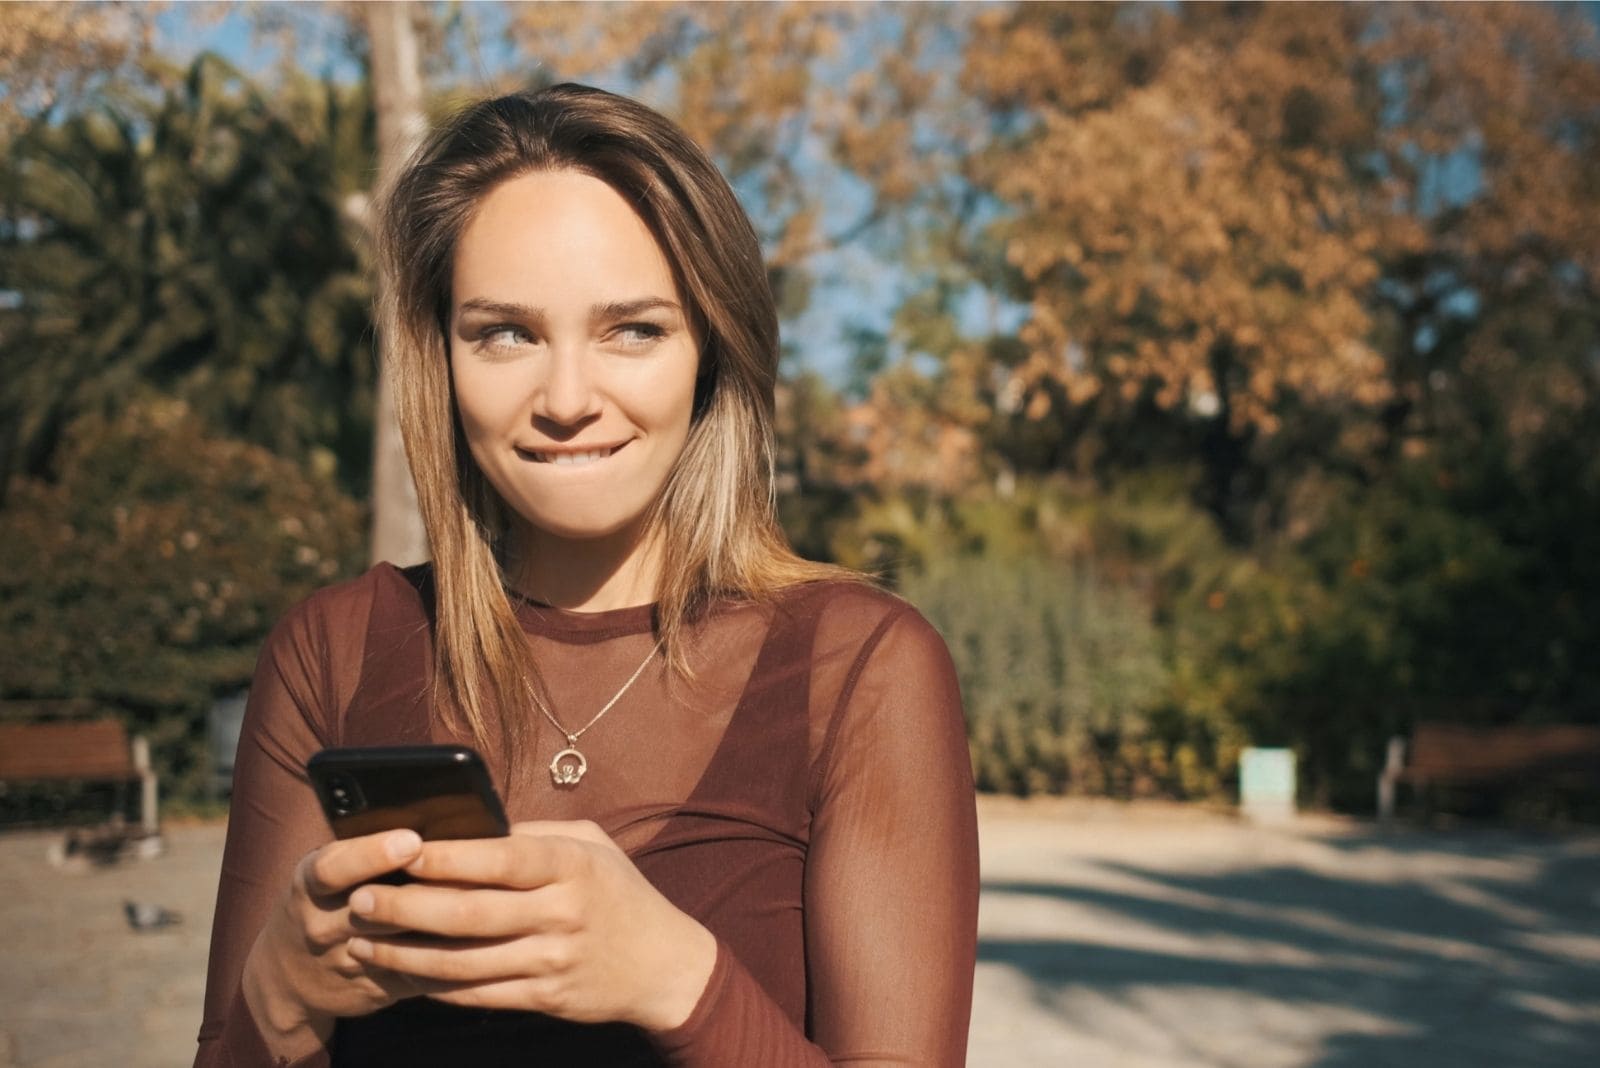 naughty woman holding a smartphone biting her lip while standing outdoors